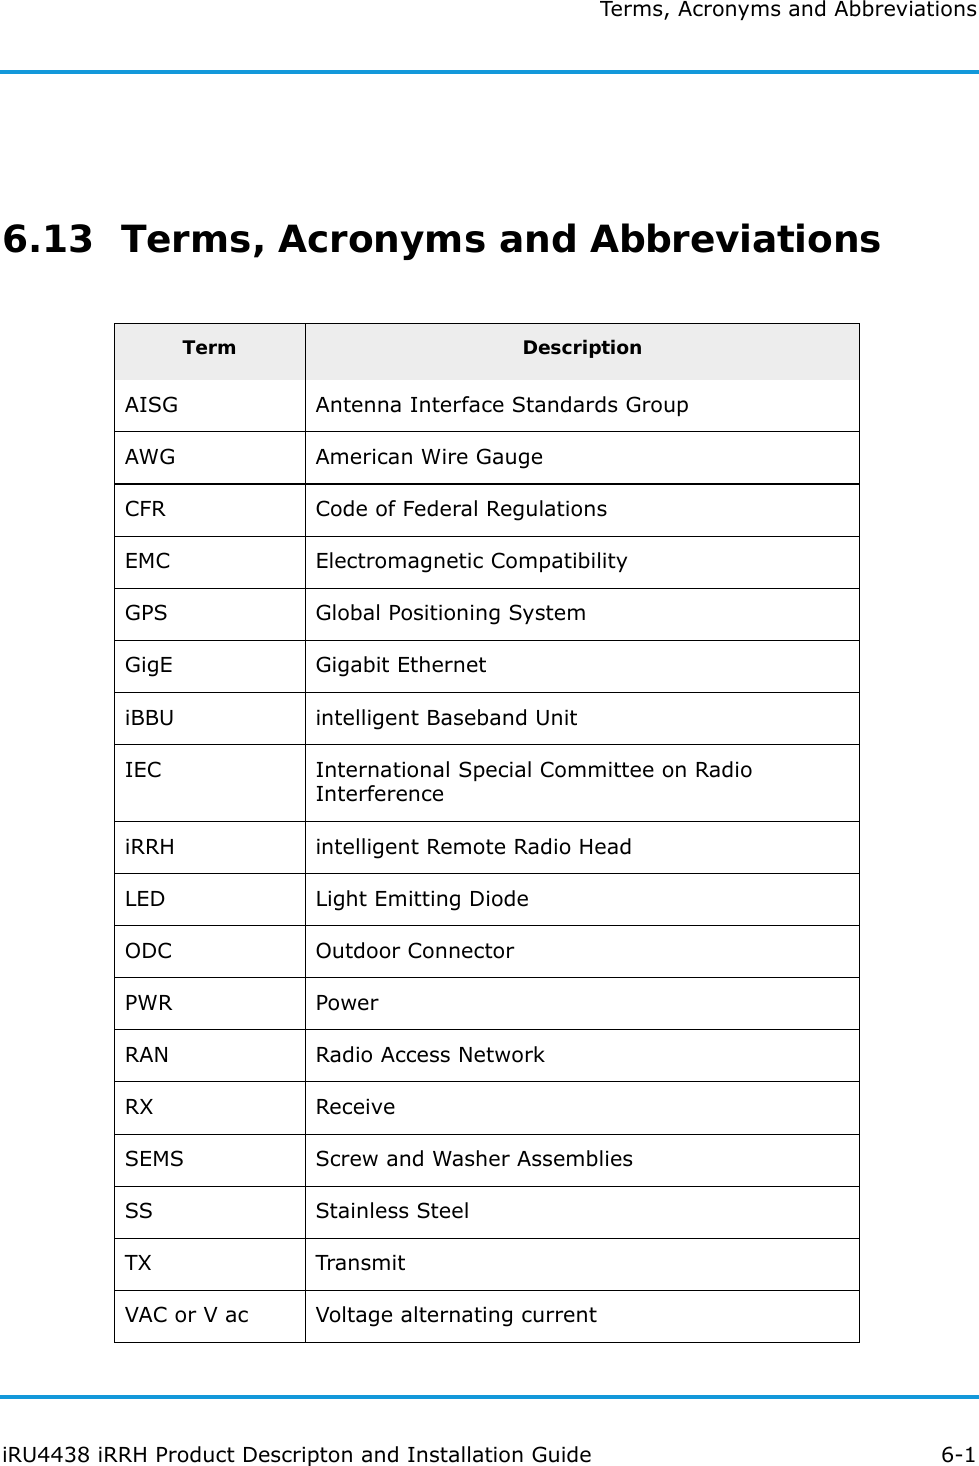 Terms, Acronyms and AbbreviationsiRU4438 iRRH Product Descripton and Installation Guide 6-16.13  Terms, Acronyms and AbbreviationsTerm DescriptionAISG Antenna Interface Standards GroupAWG American Wire GaugeCFR Code of Federal RegulationsEMC Electromagnetic CompatibilityGPS Global Positioning SystemGigE Gigabit EthernetiBBU intelligent Baseband UnitIEC International Special Committee on Radio InterferenceiRRH intelligent Remote Radio HeadLED Light Emitting DiodeODC Outdoor ConnectorPWR PowerRAN Radio Access NetworkRX ReceiveSEMS Screw and Washer AssembliesSS Stainless SteelTX TransmitVAC or V ac Voltage alternating current